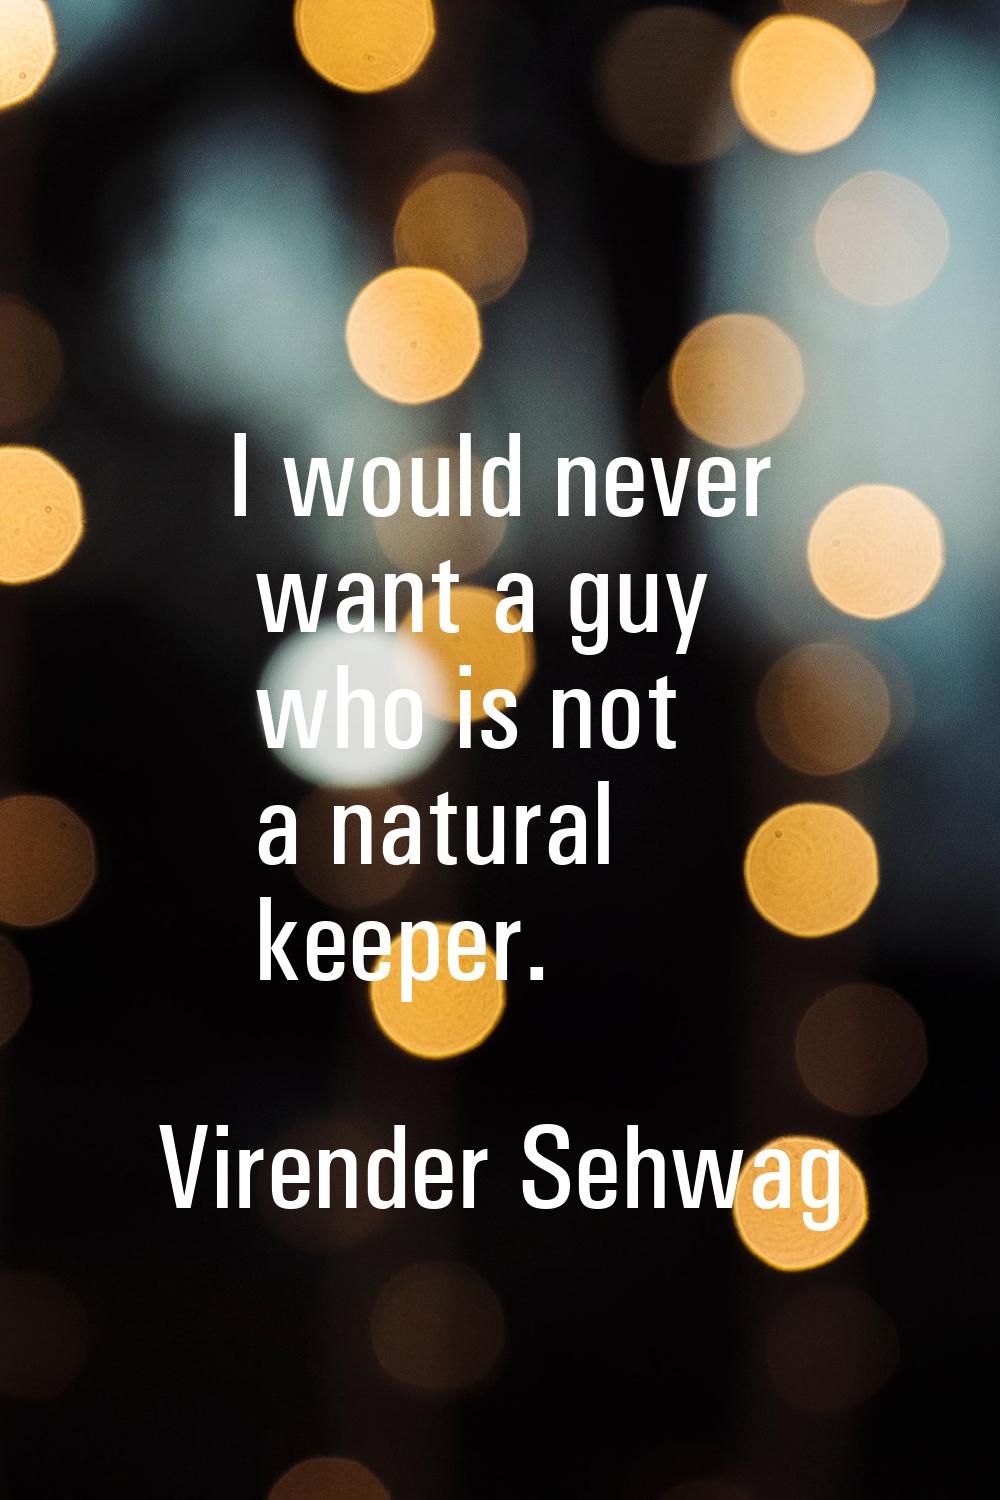 I would never want a guy who is not a natural keeper.